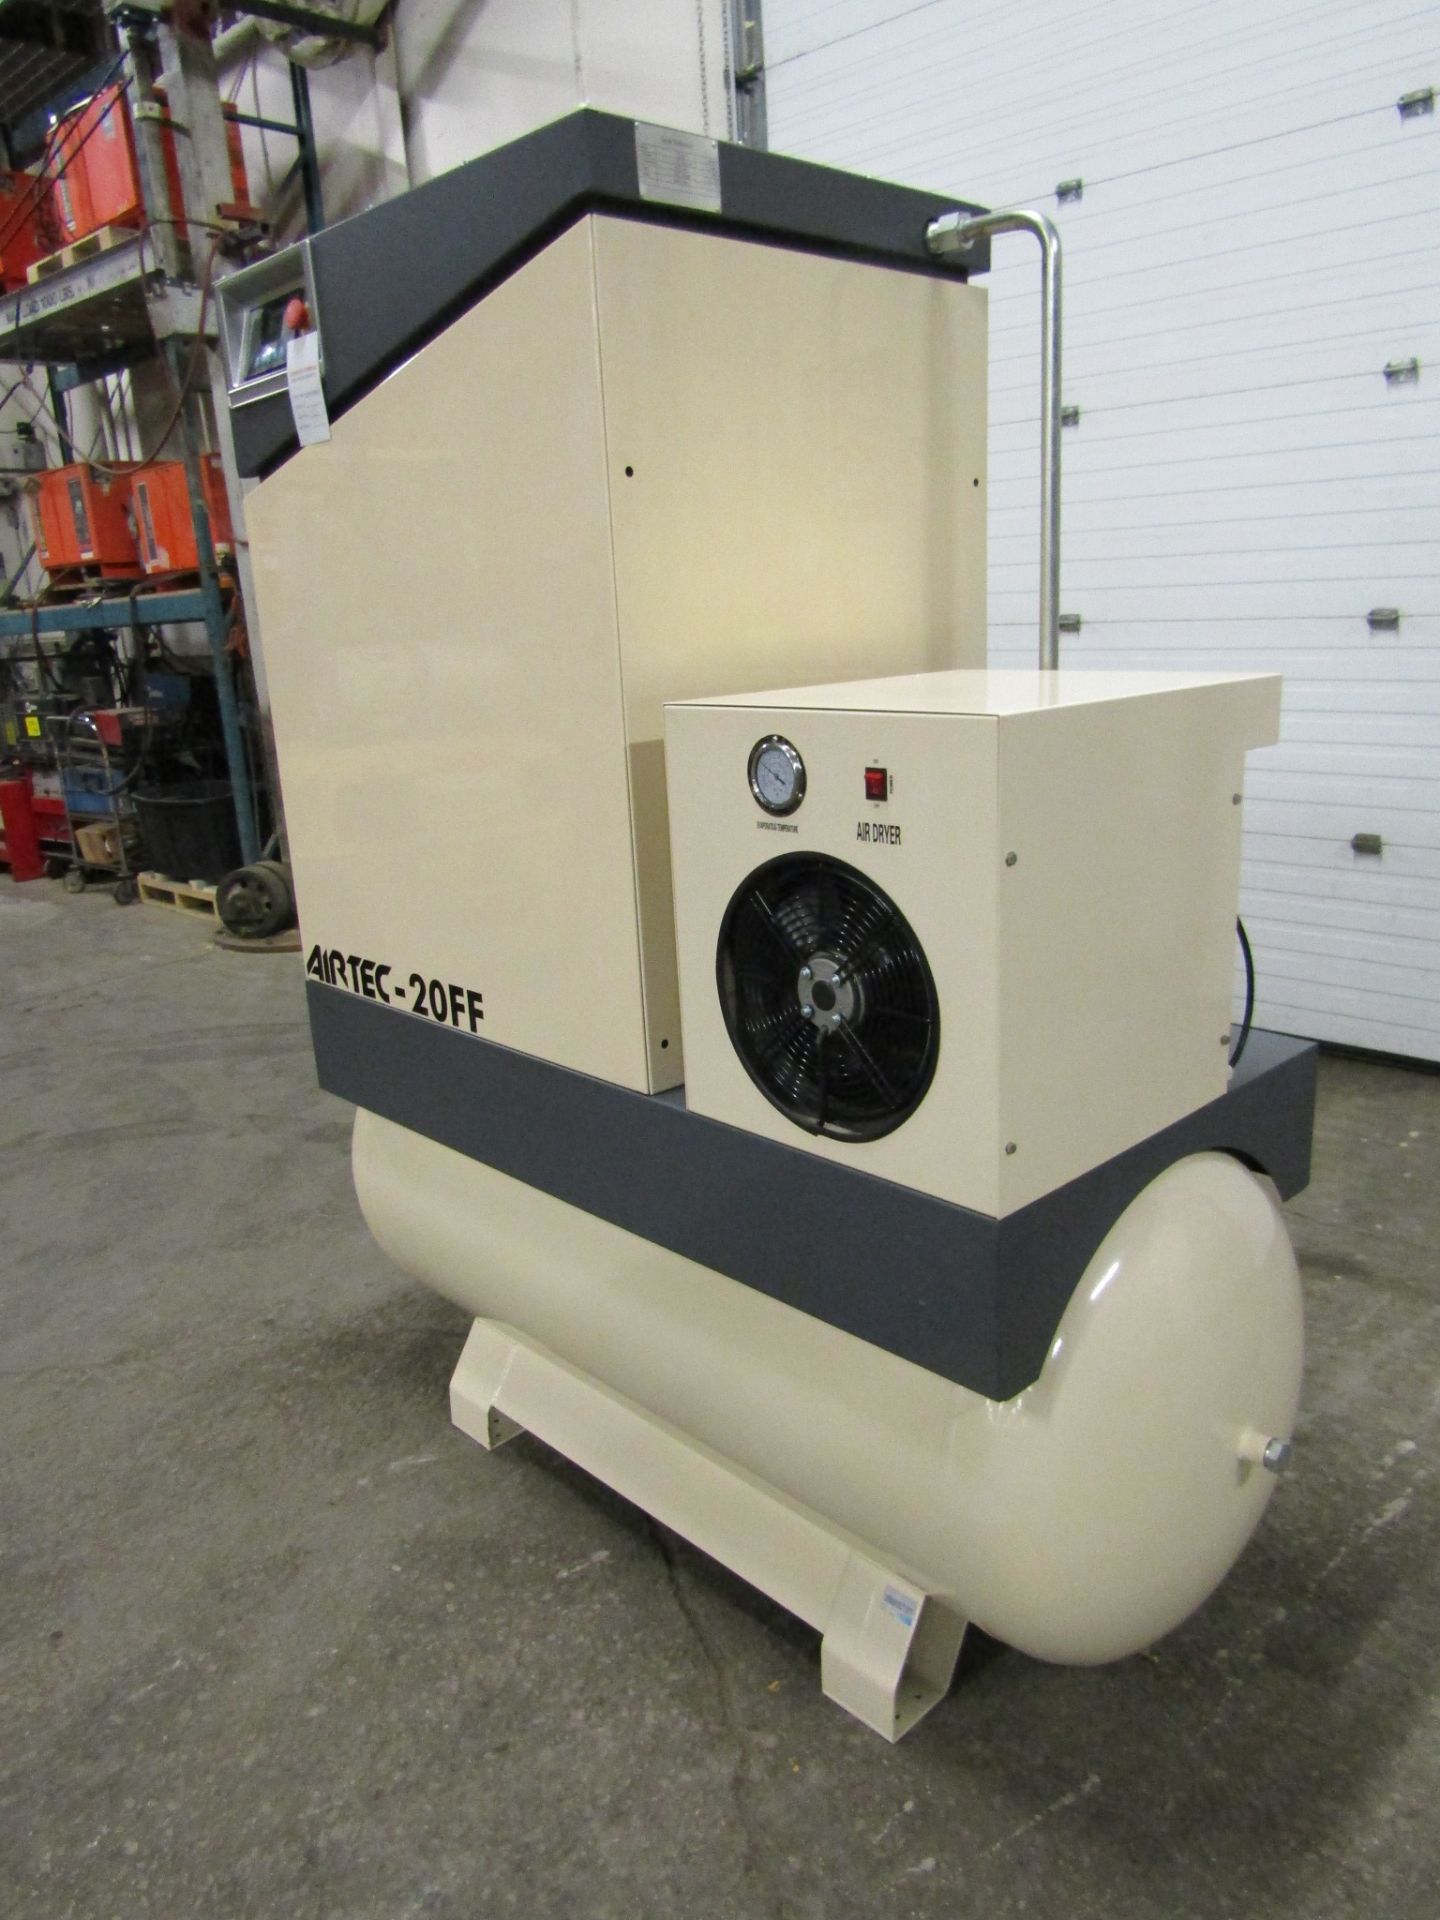 Airtec model 20FF - 20HP Air Compressor with built on DRYER - MINT UNUSED COMPRESSOR with 125 Gallon - Bild 3 aus 3